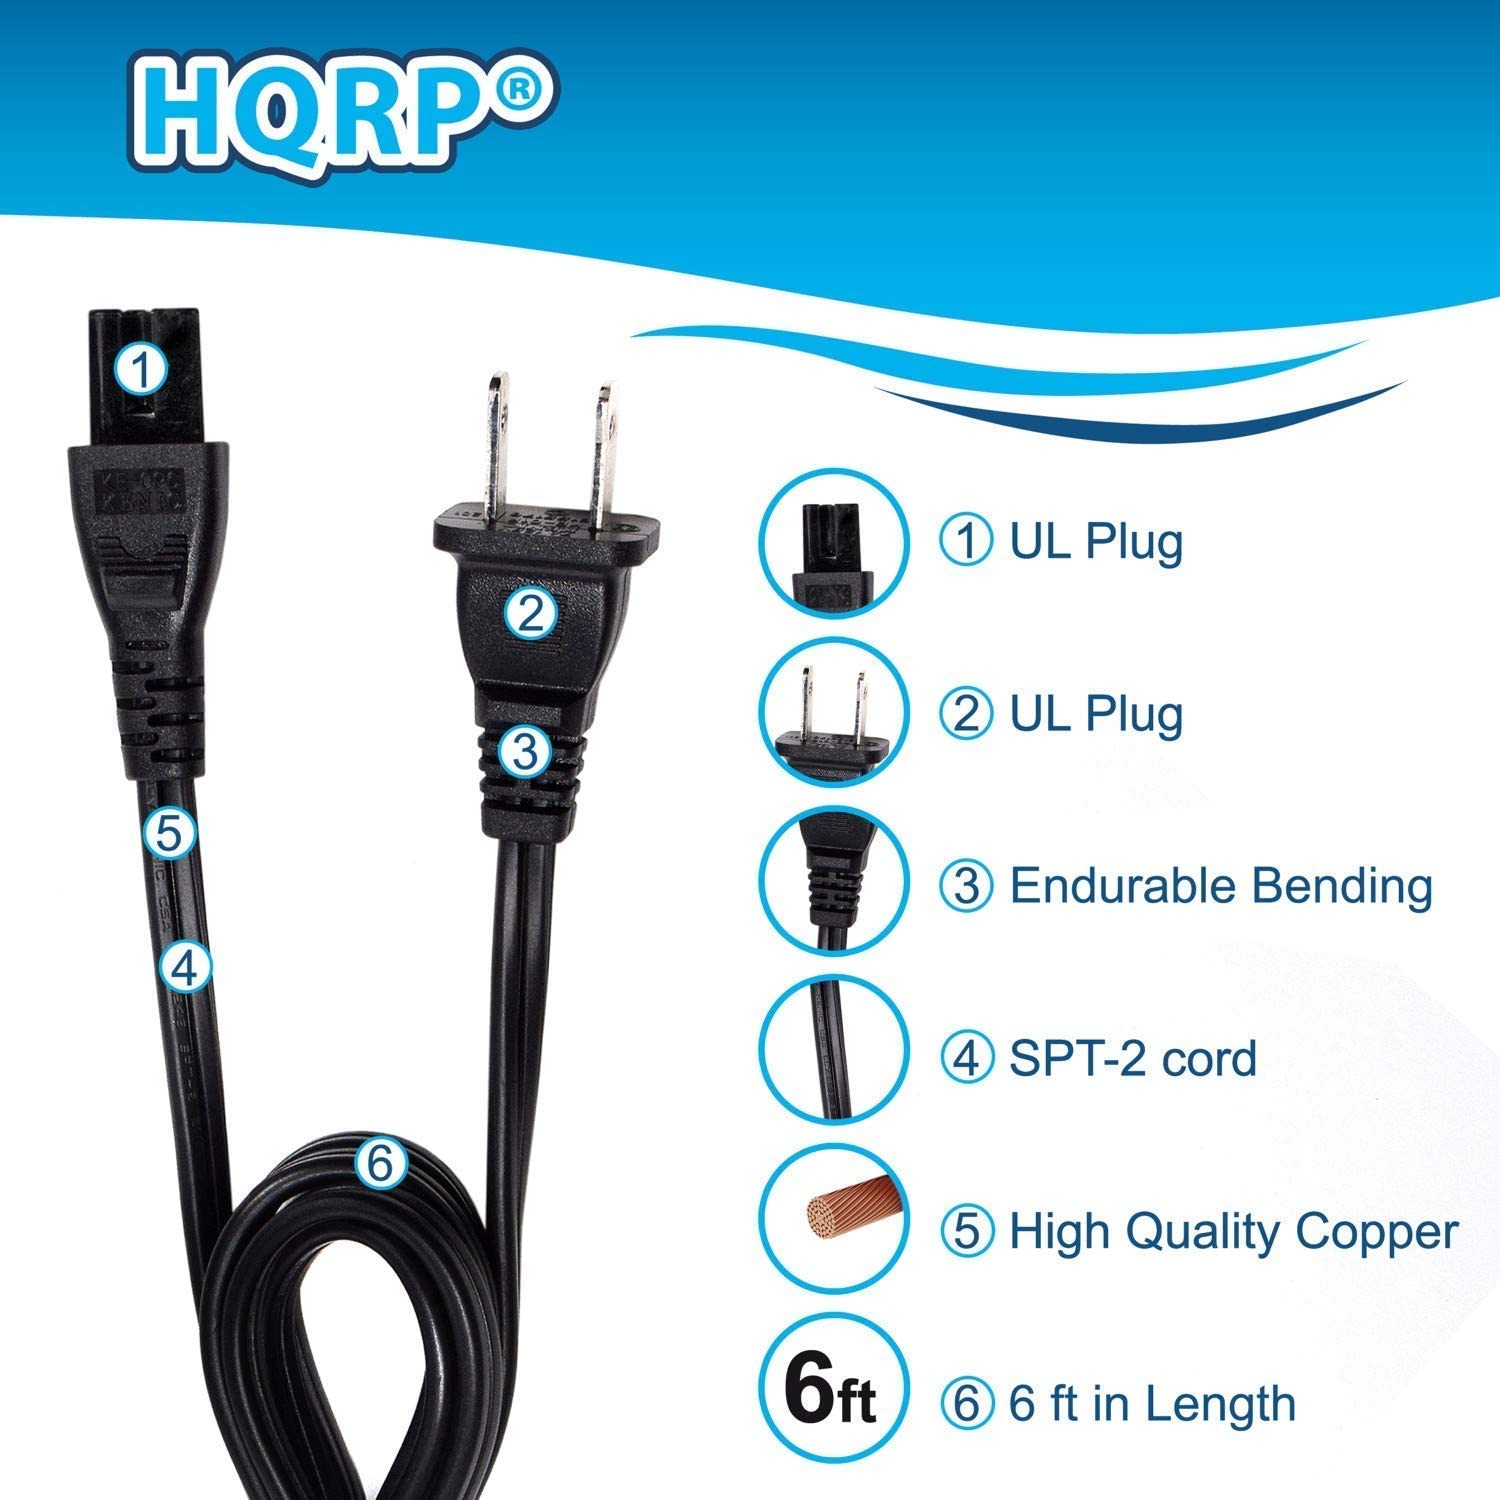 HQRP AC Power Cord works with COMPANION Stereo 3, 5 Speakers, Companion 3 Series II Multimedia Speaker System Mains Cable - image 3 of 7